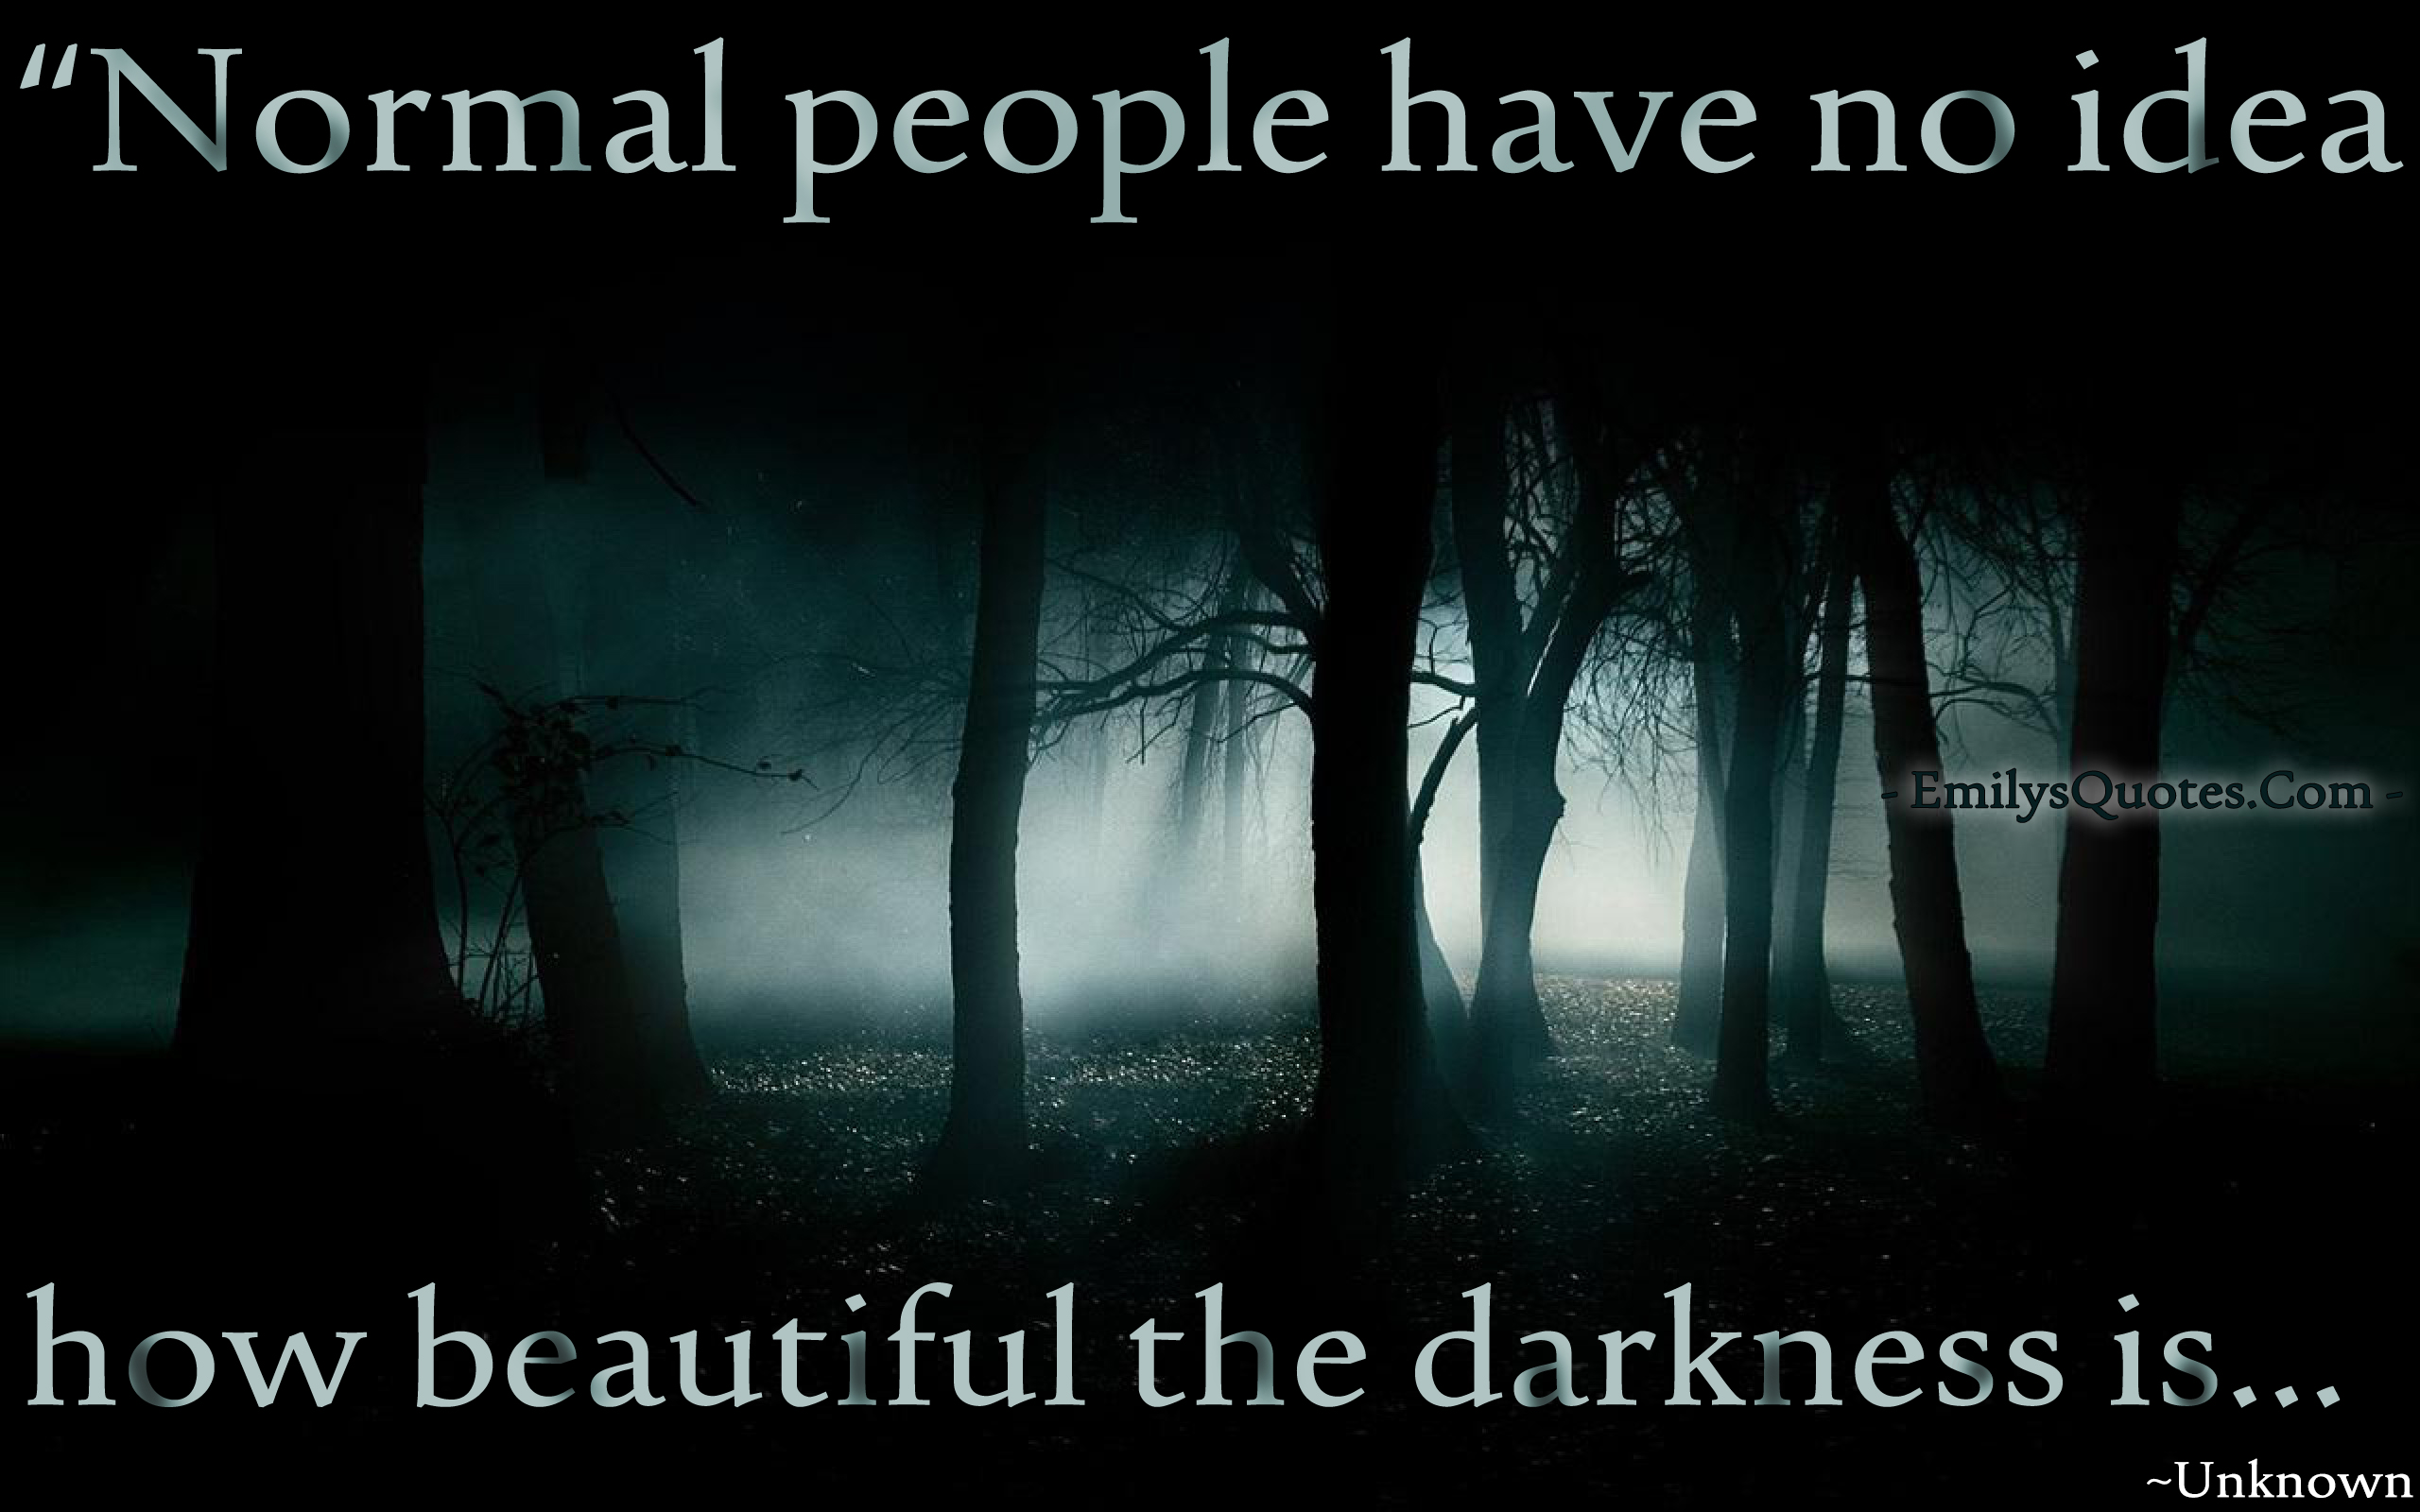 62 Most Beautiful Darkness Quotes And Sayings